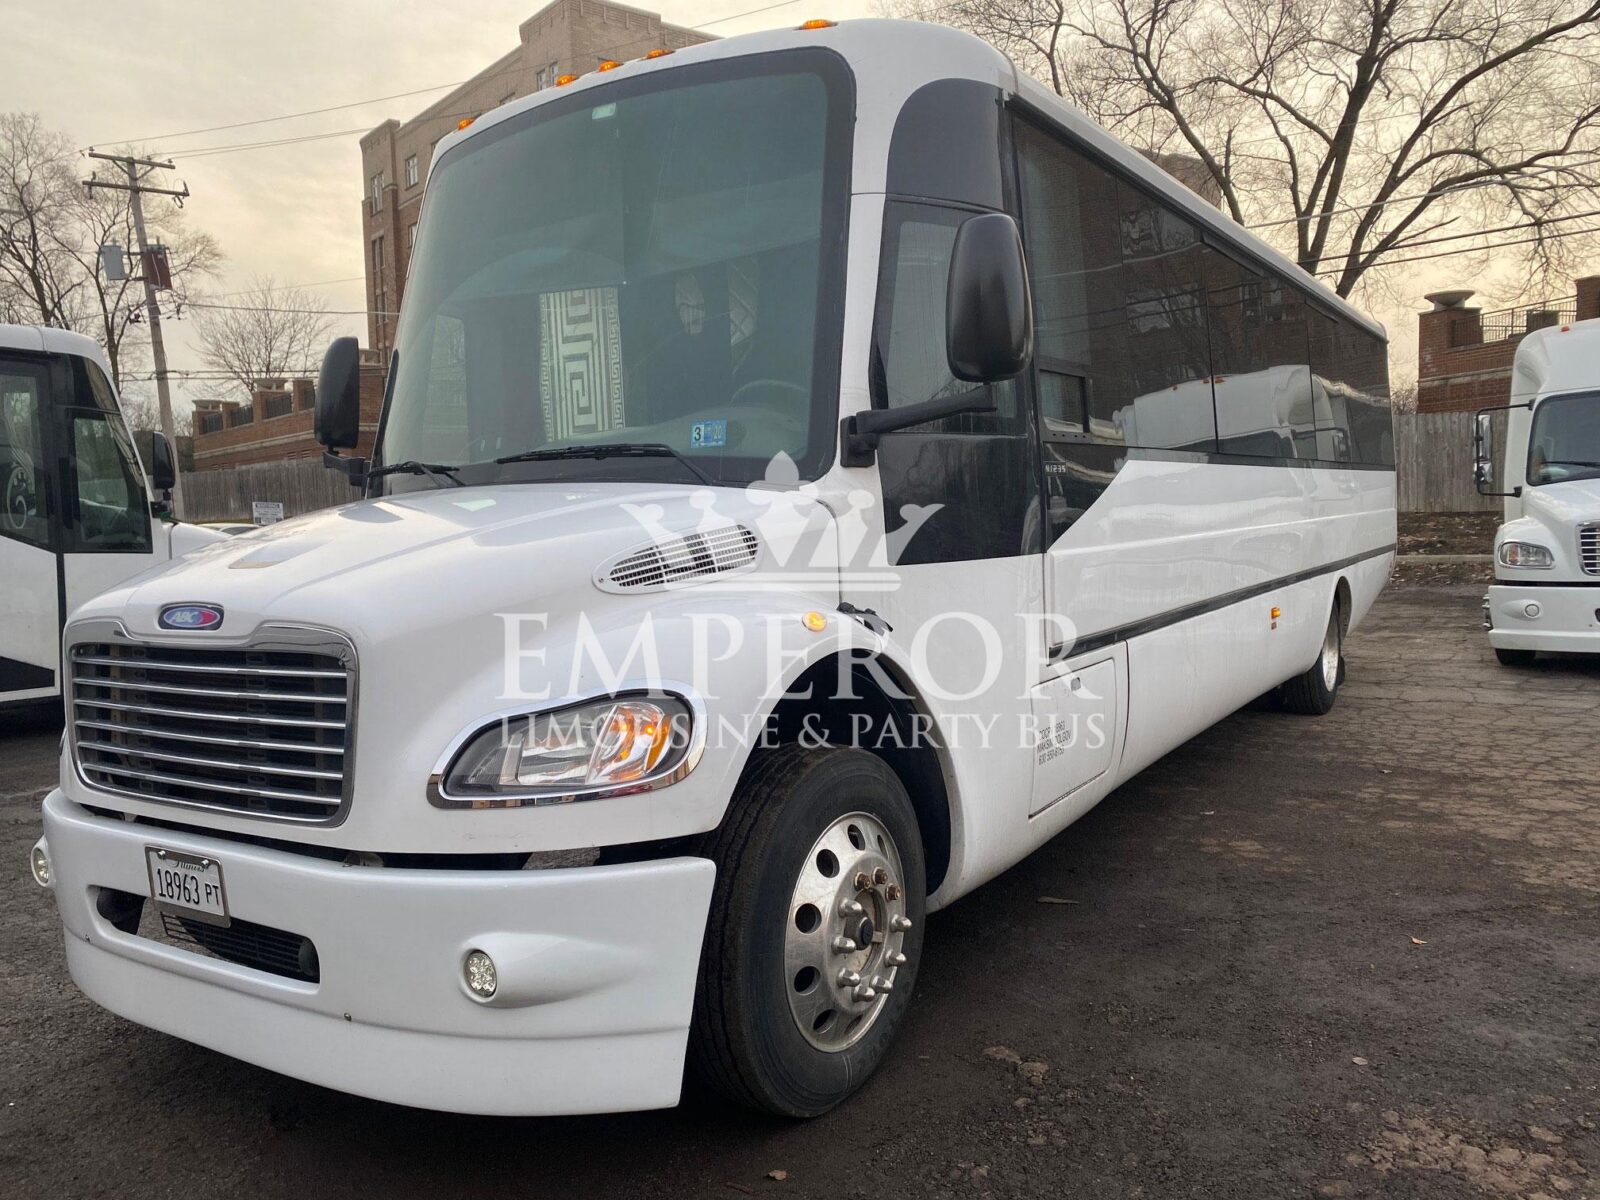 Hire party bus in Bartlett